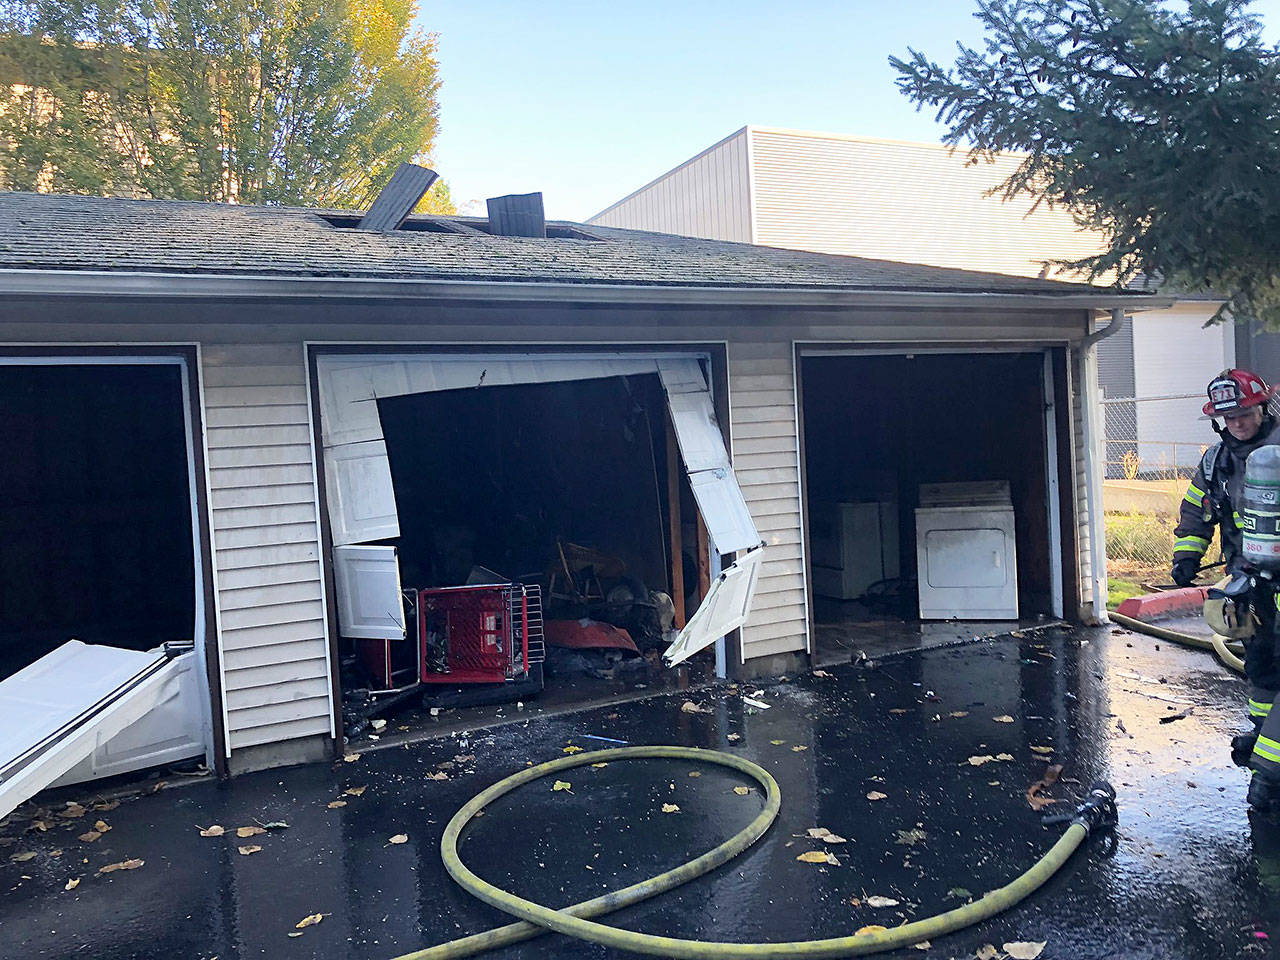 Puget Sound RFA firefighters put out a fire at a garage Wednesday at the Alderbrooke Apartments in Kent. COURTESY PHOTO, Puget Sound Fire